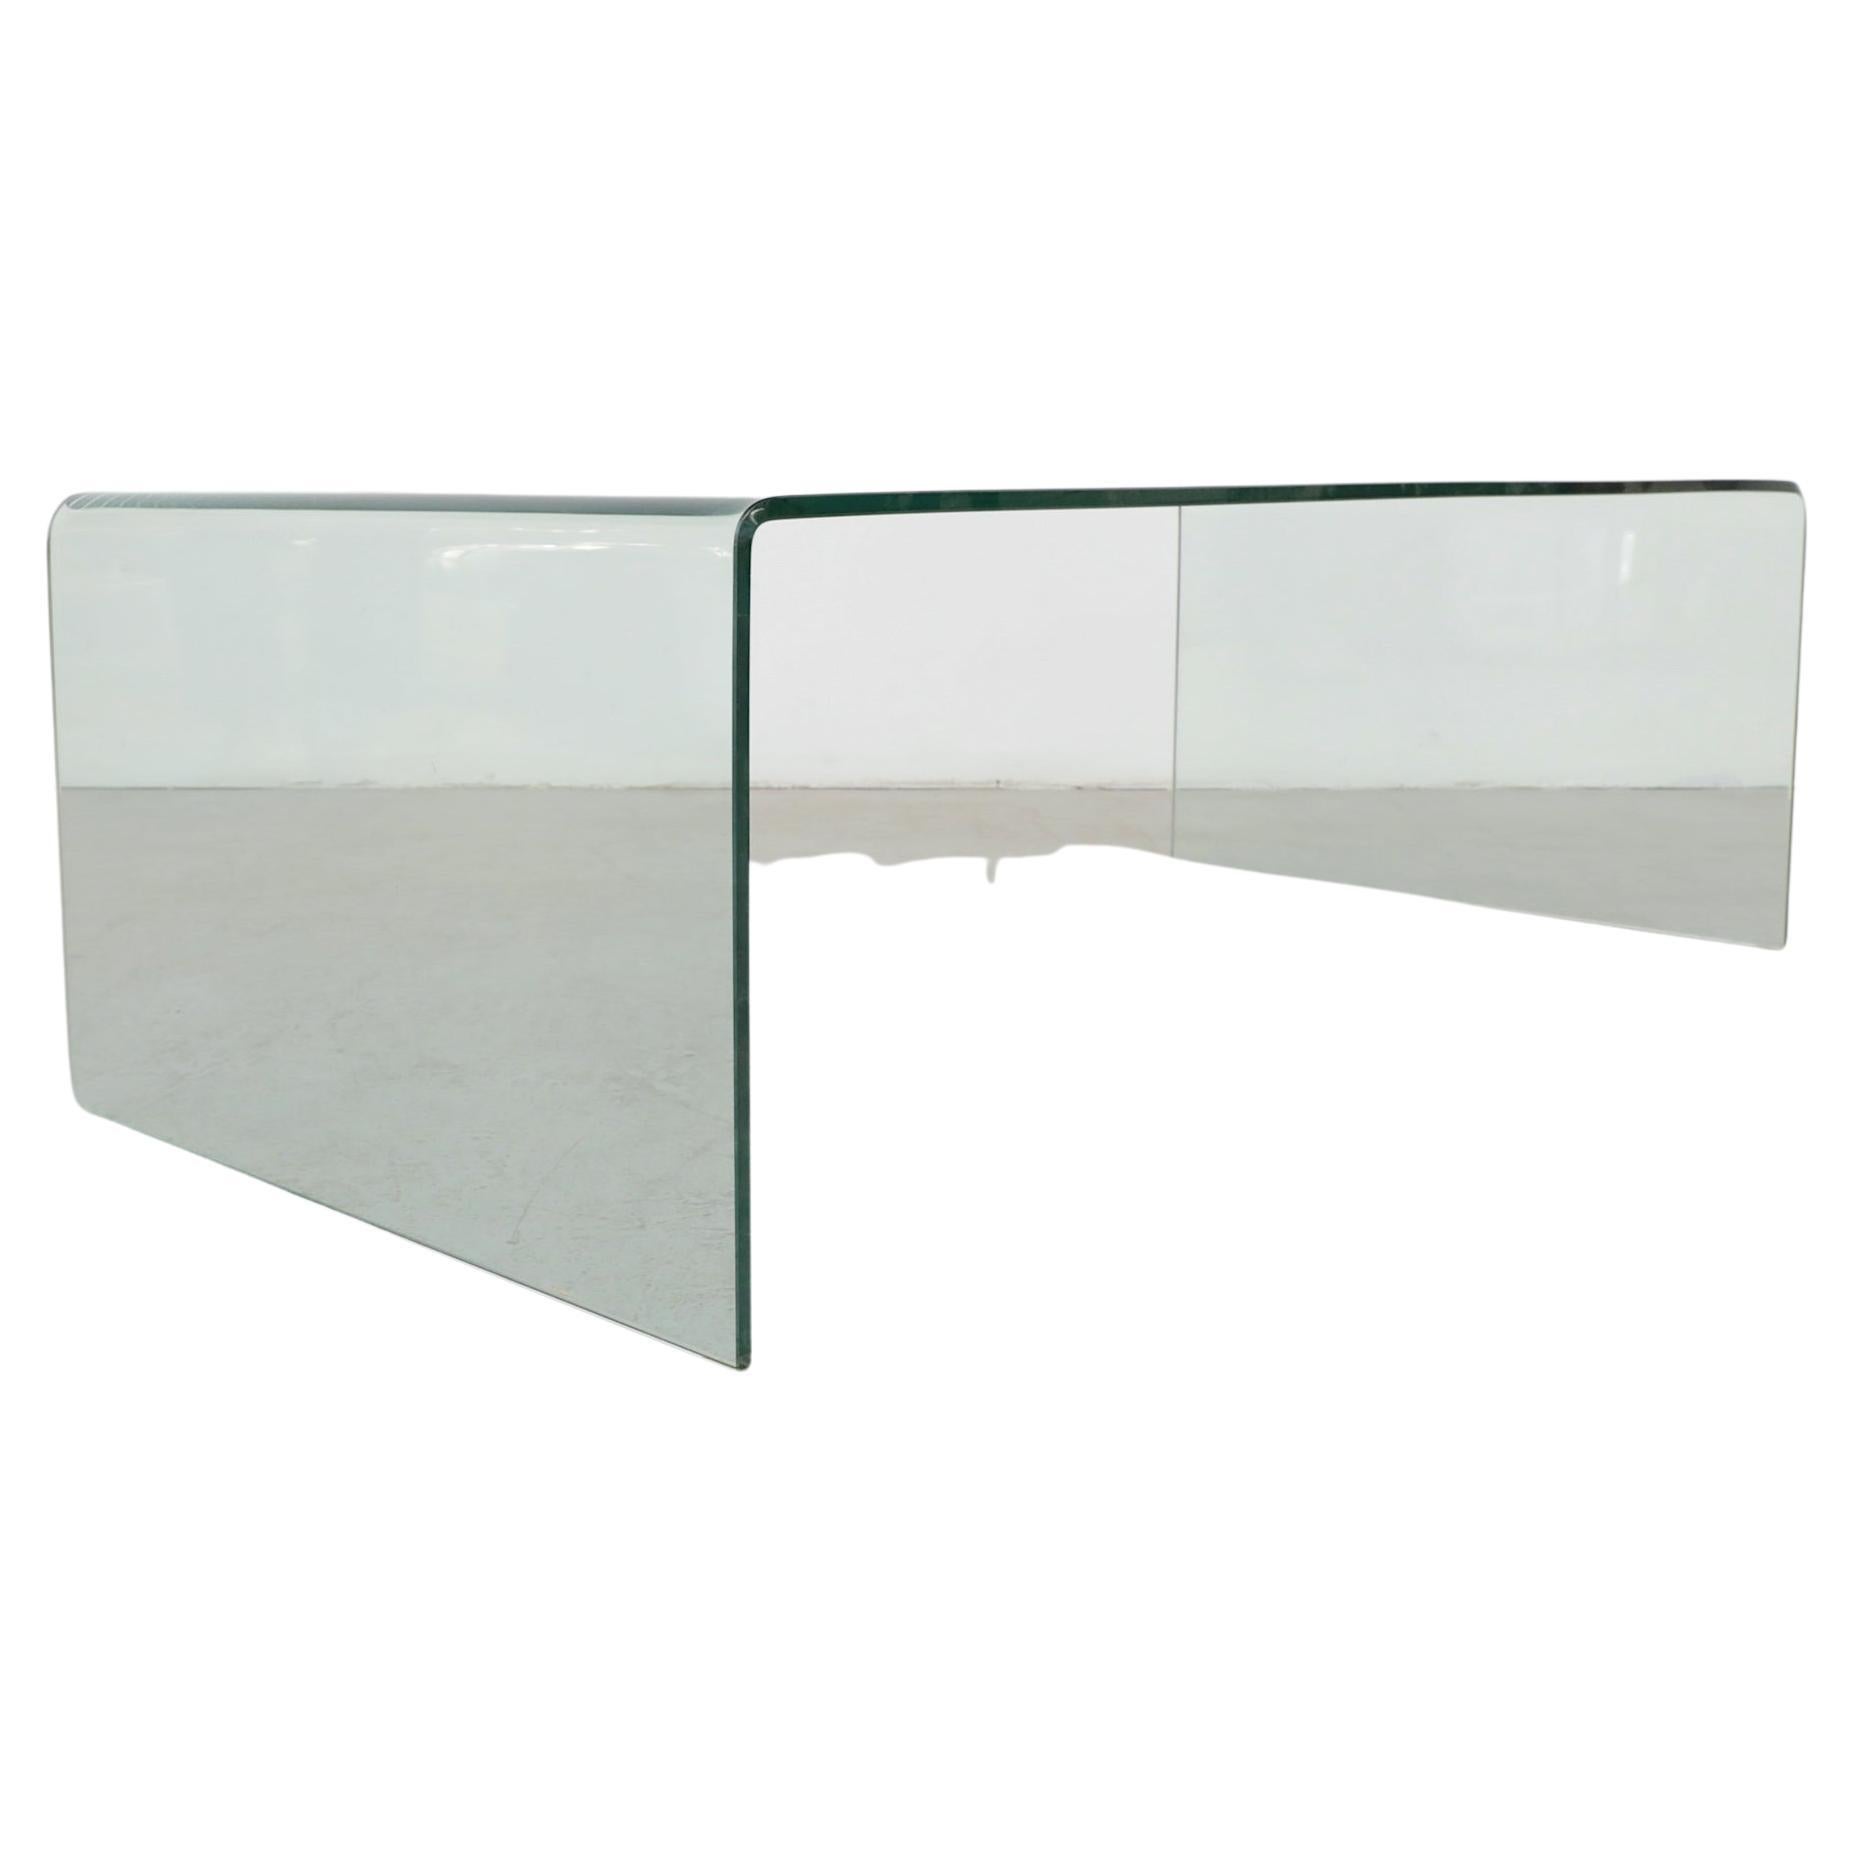 Angelo Cortesi (attr) 1980s glass waterfall coffee table, for Fiam Italia. The coffee table is made from one continuous piece of slumped glass. In original condition with some chipping to the bottom corners and light scratching on the top surface.